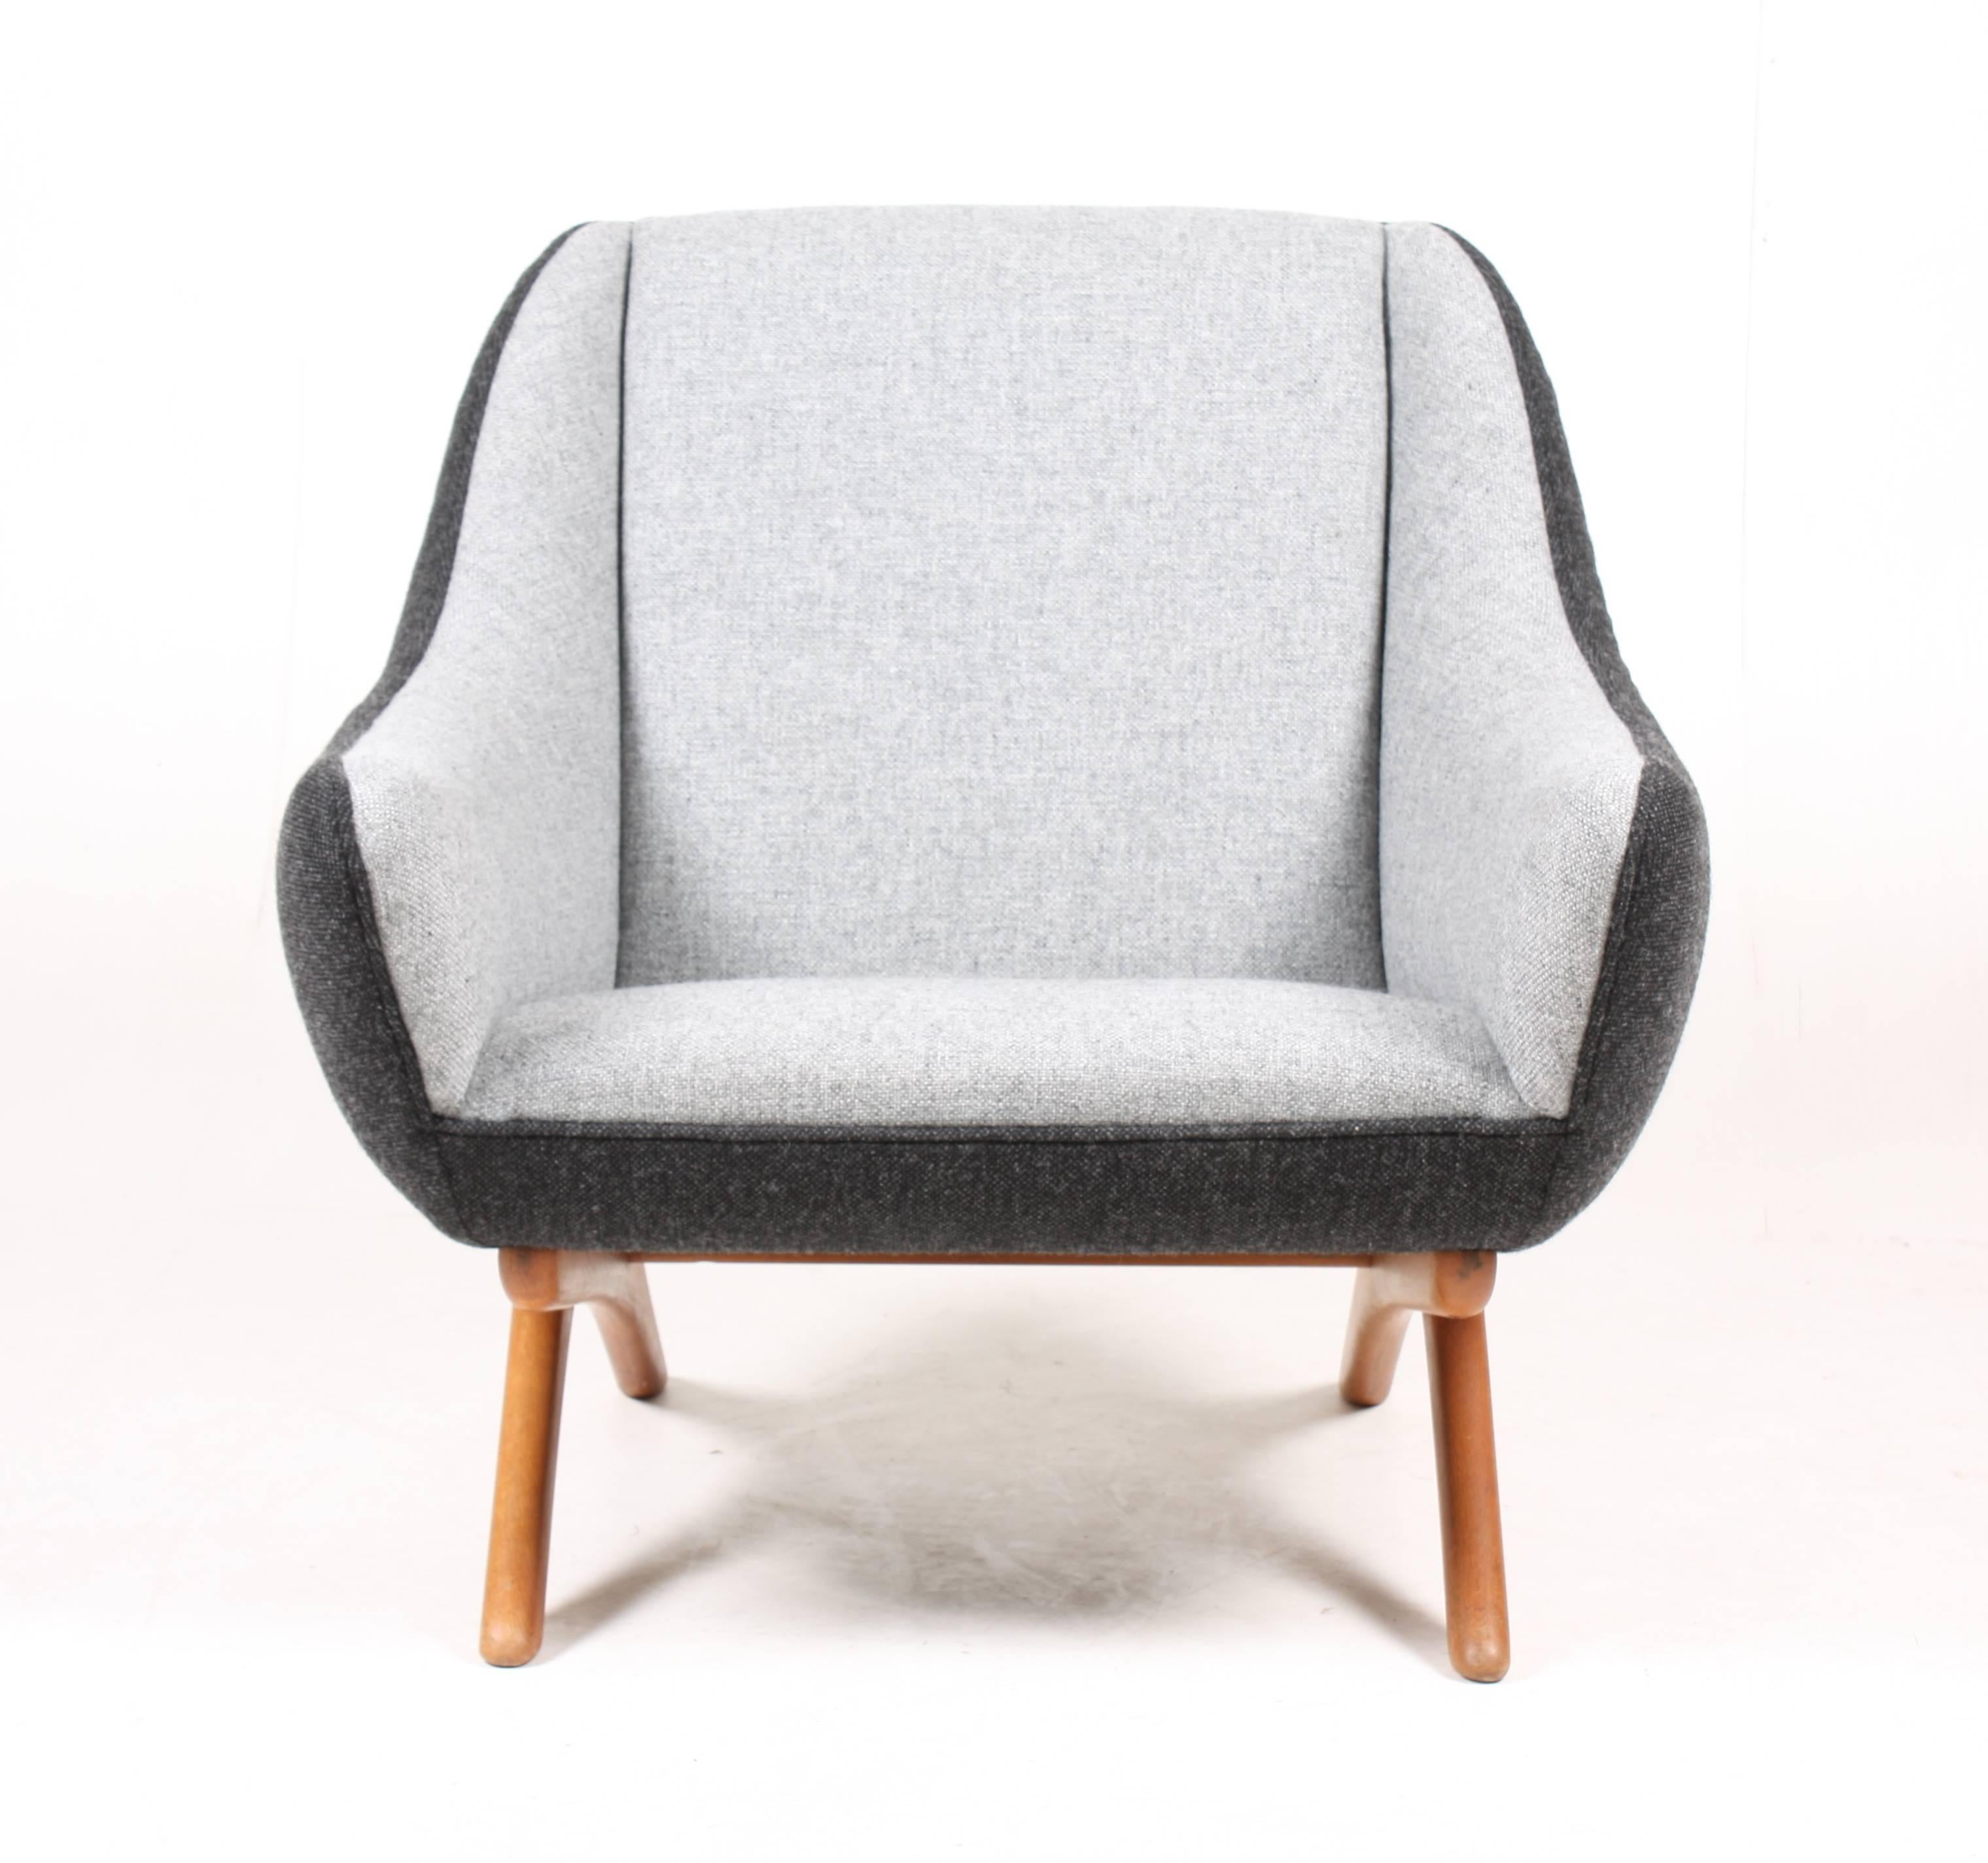 Lounge chair and ottoman in oil finished oak and new fabric by Kvadrat. Designed by Maa. Illum Wikkelsoe for Mikael Laursen cabinetmakers. Made in Denmark in the 1950s great condition.